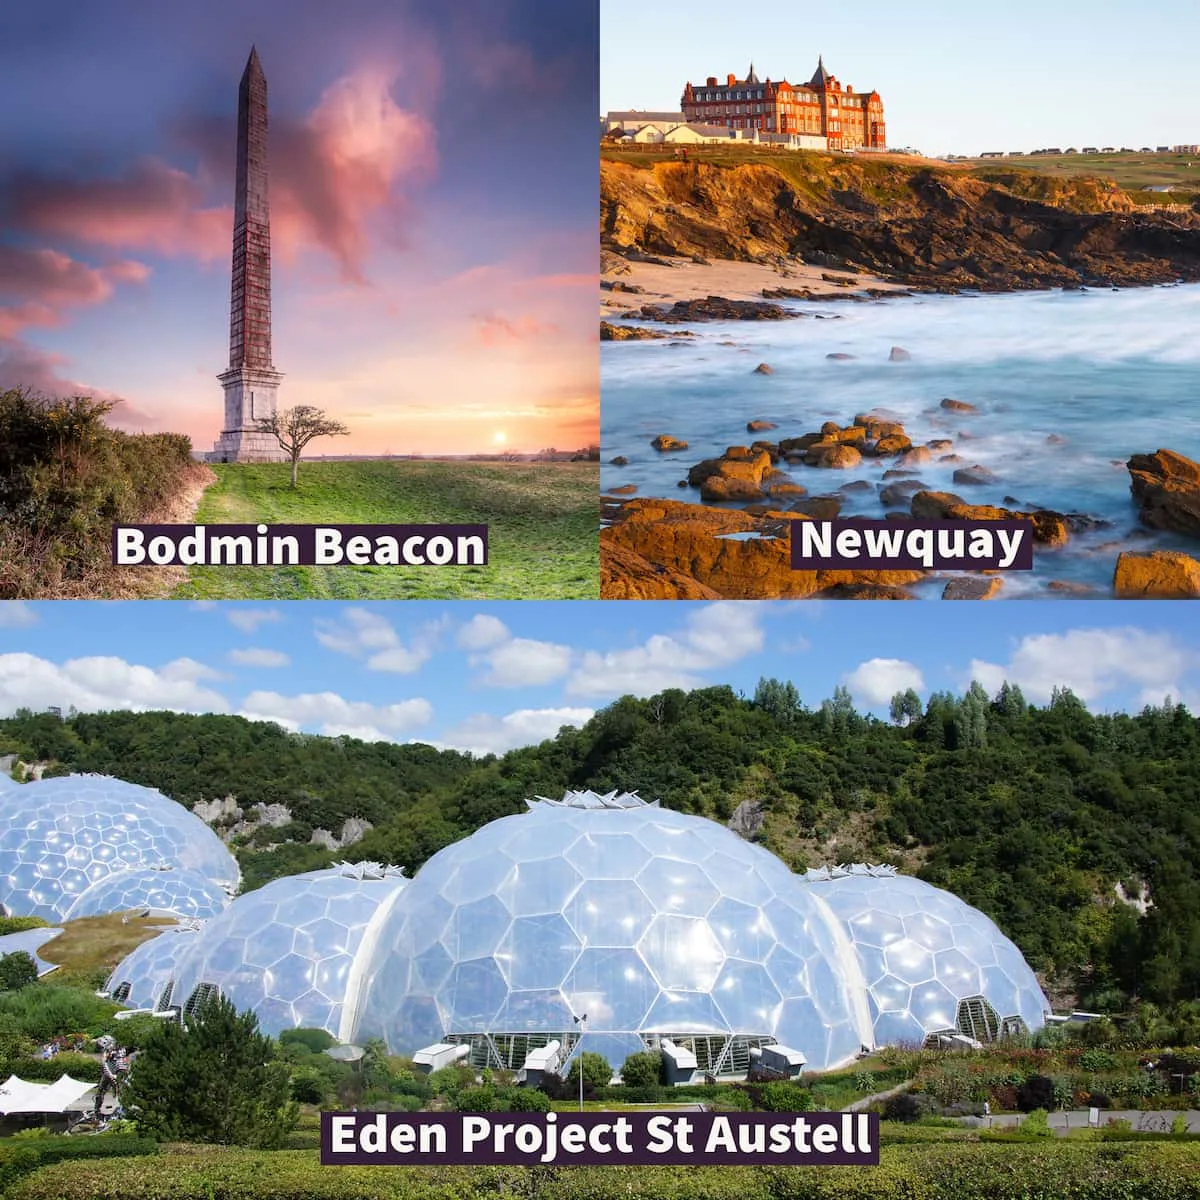 Top left the views at Bodim Beacon, top right view of Newquay from the beach and bottom Eden Project in St Austell.